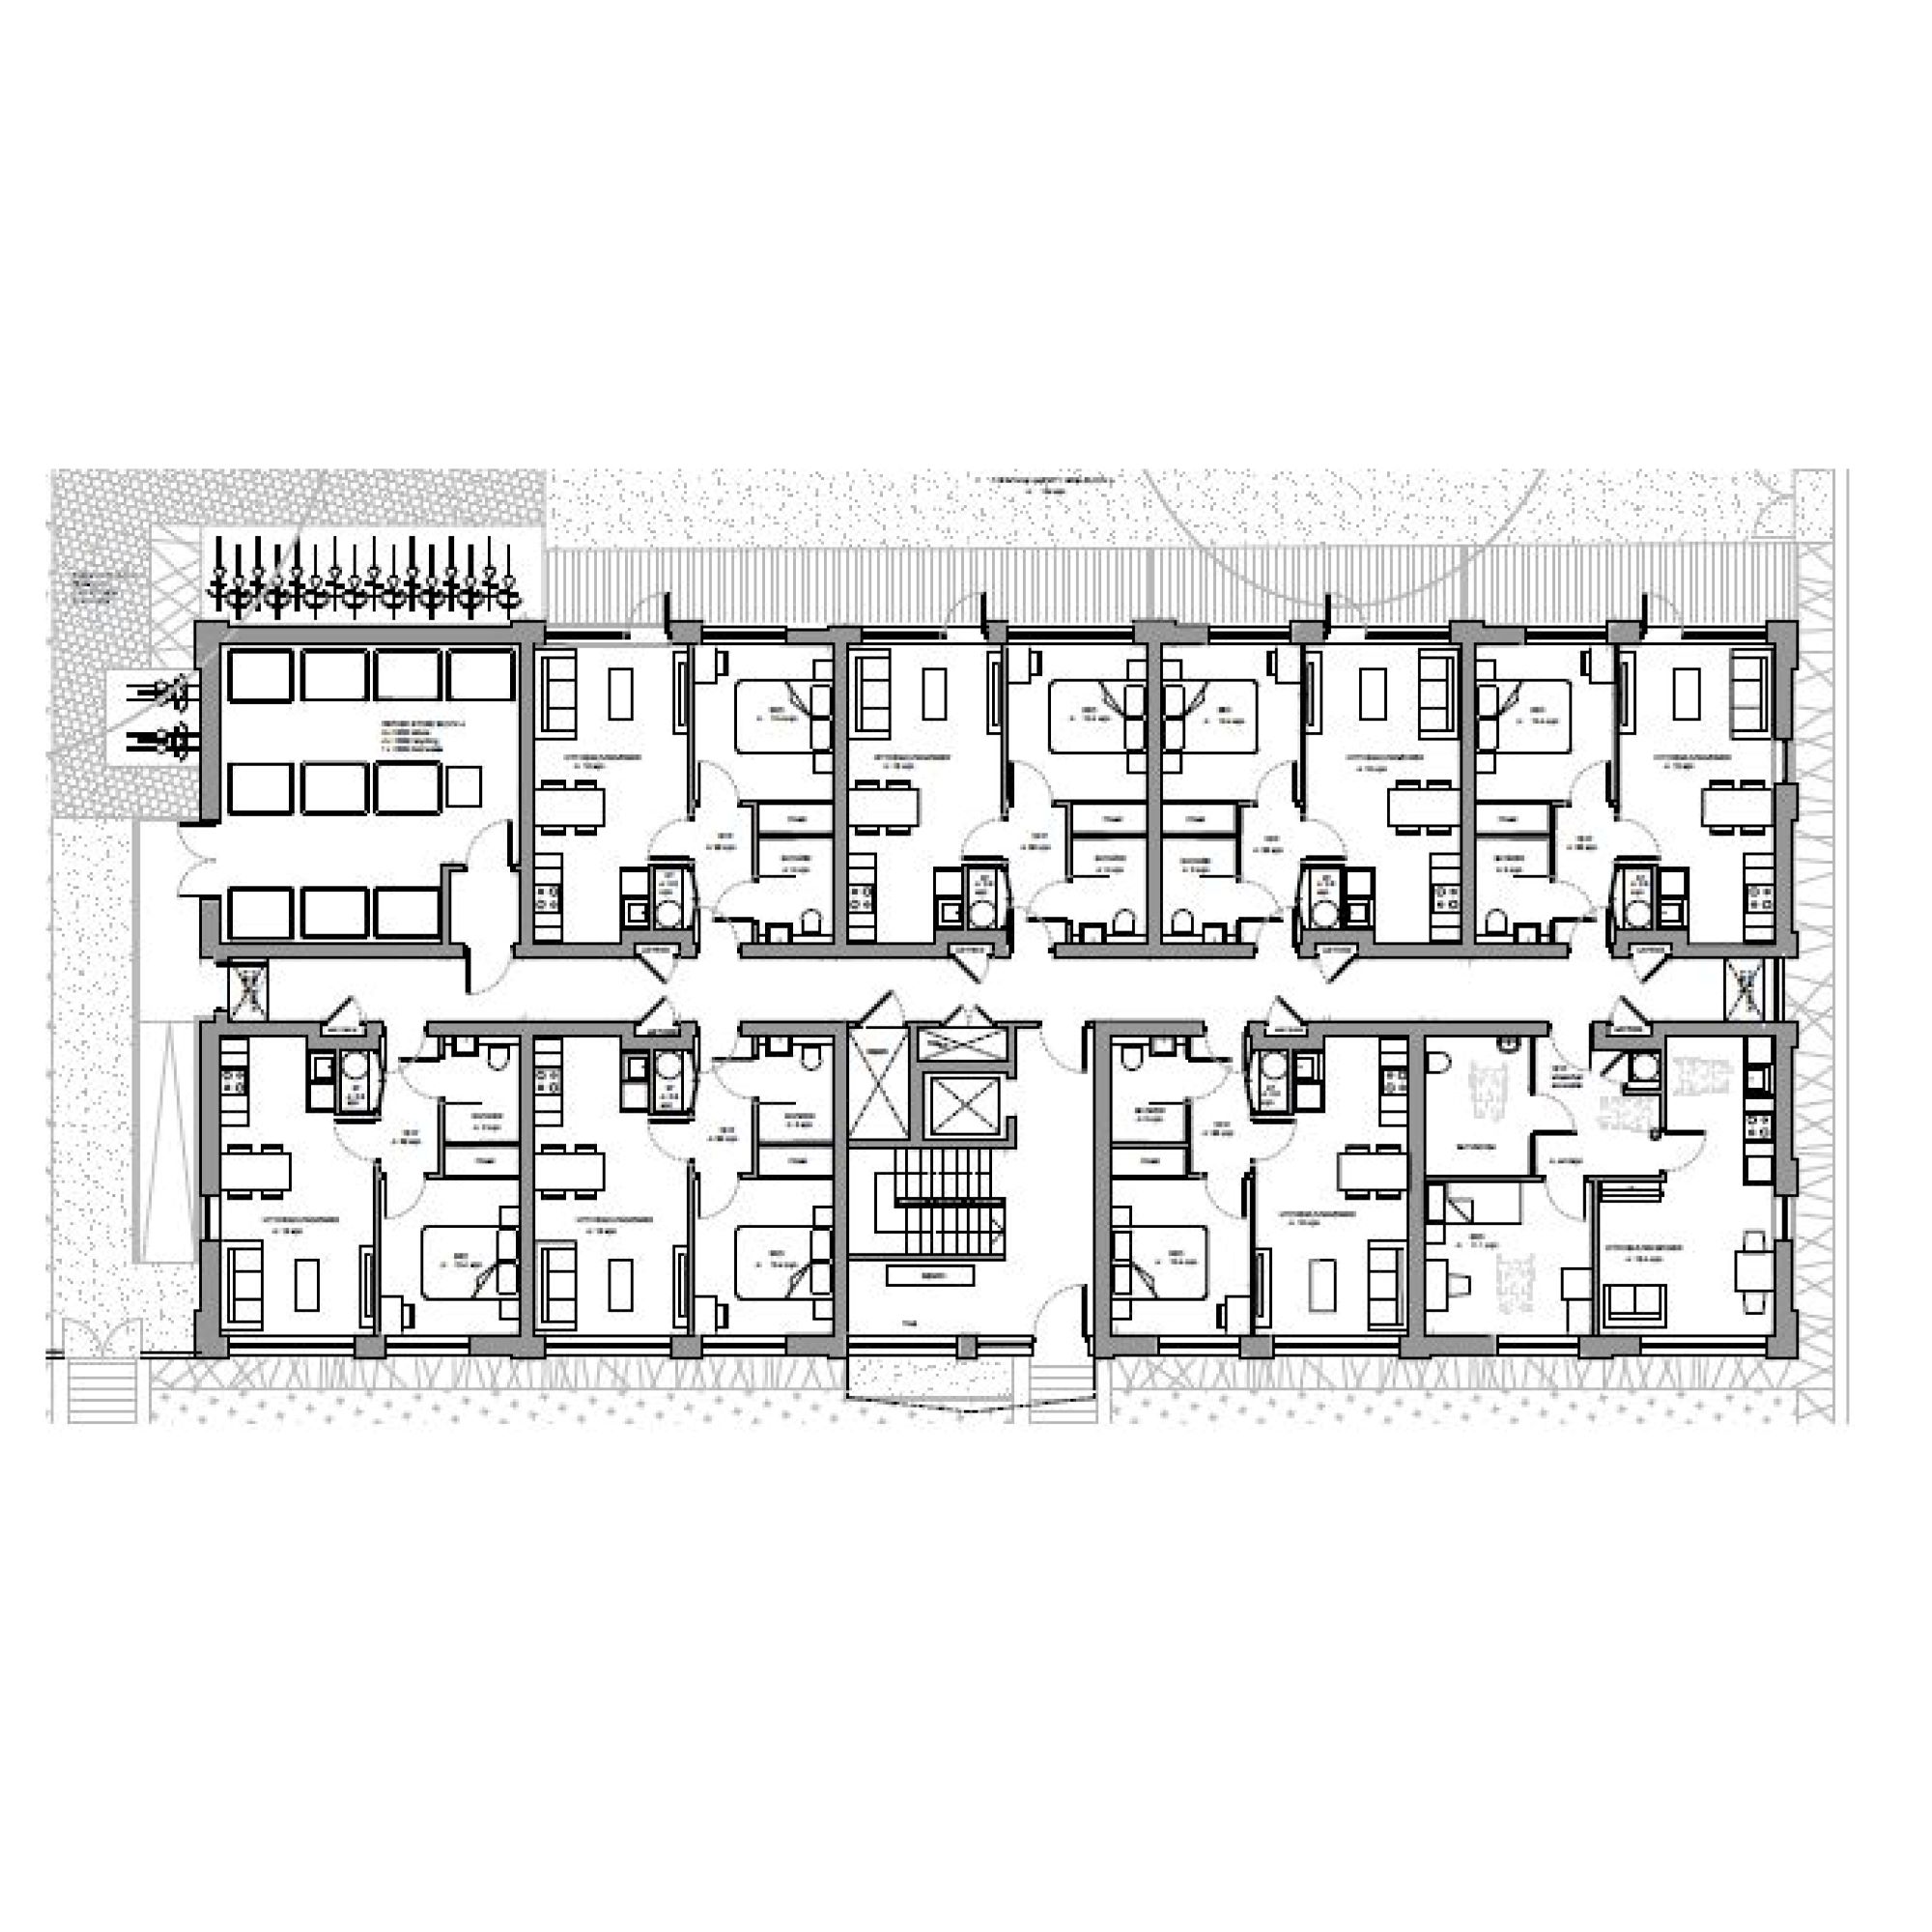 Block A ground floor plan. The core is located centrally in the Avenue frontage subdividing the building into two parts.